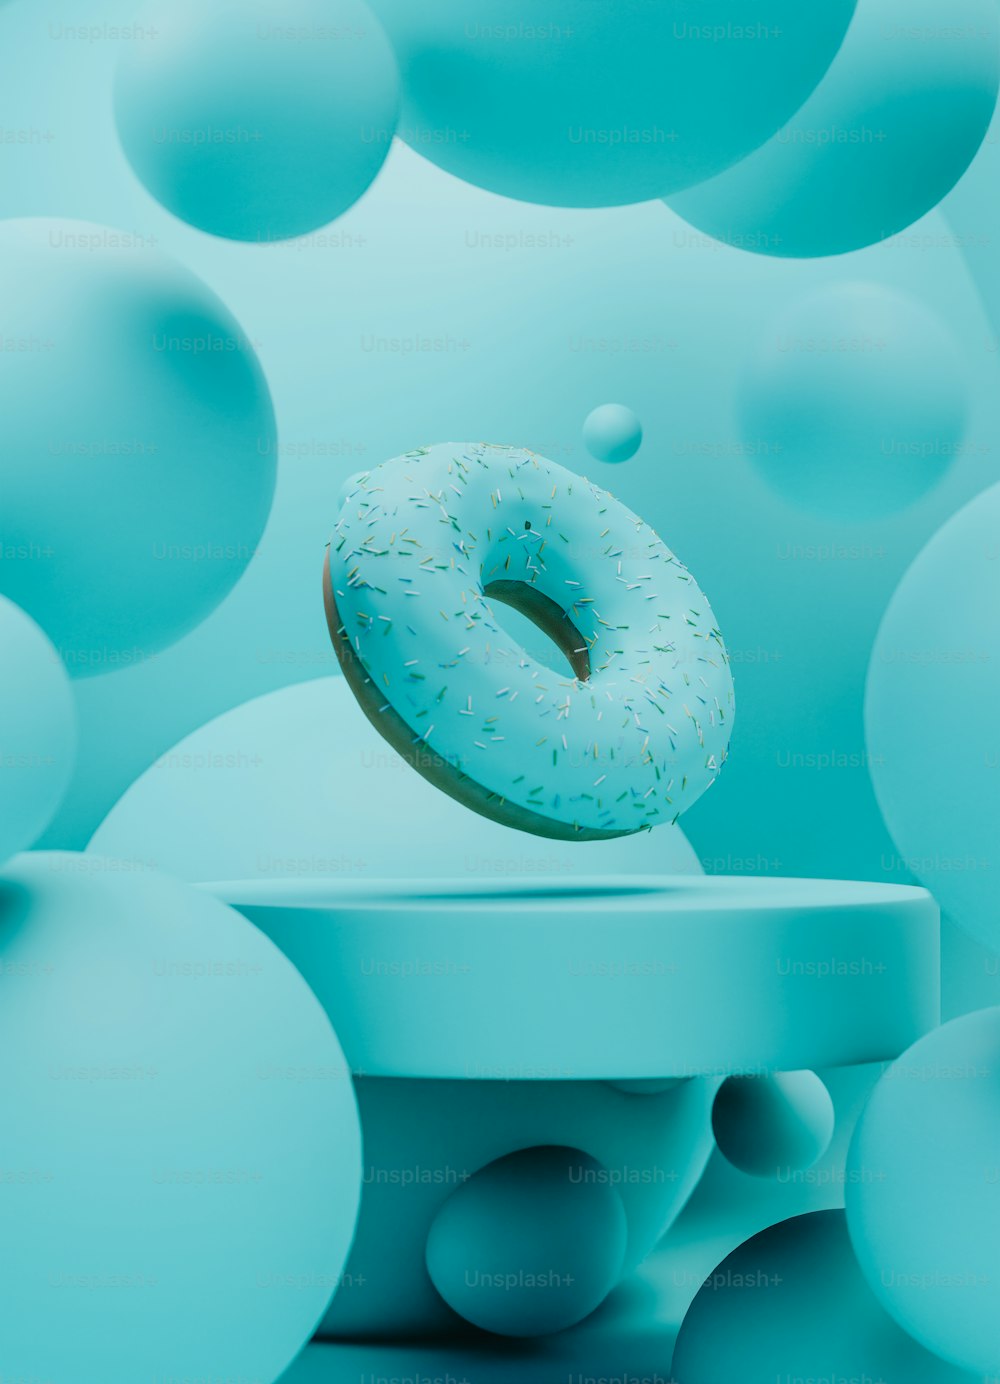 a donut sitting on top of a table surrounded by blue balls